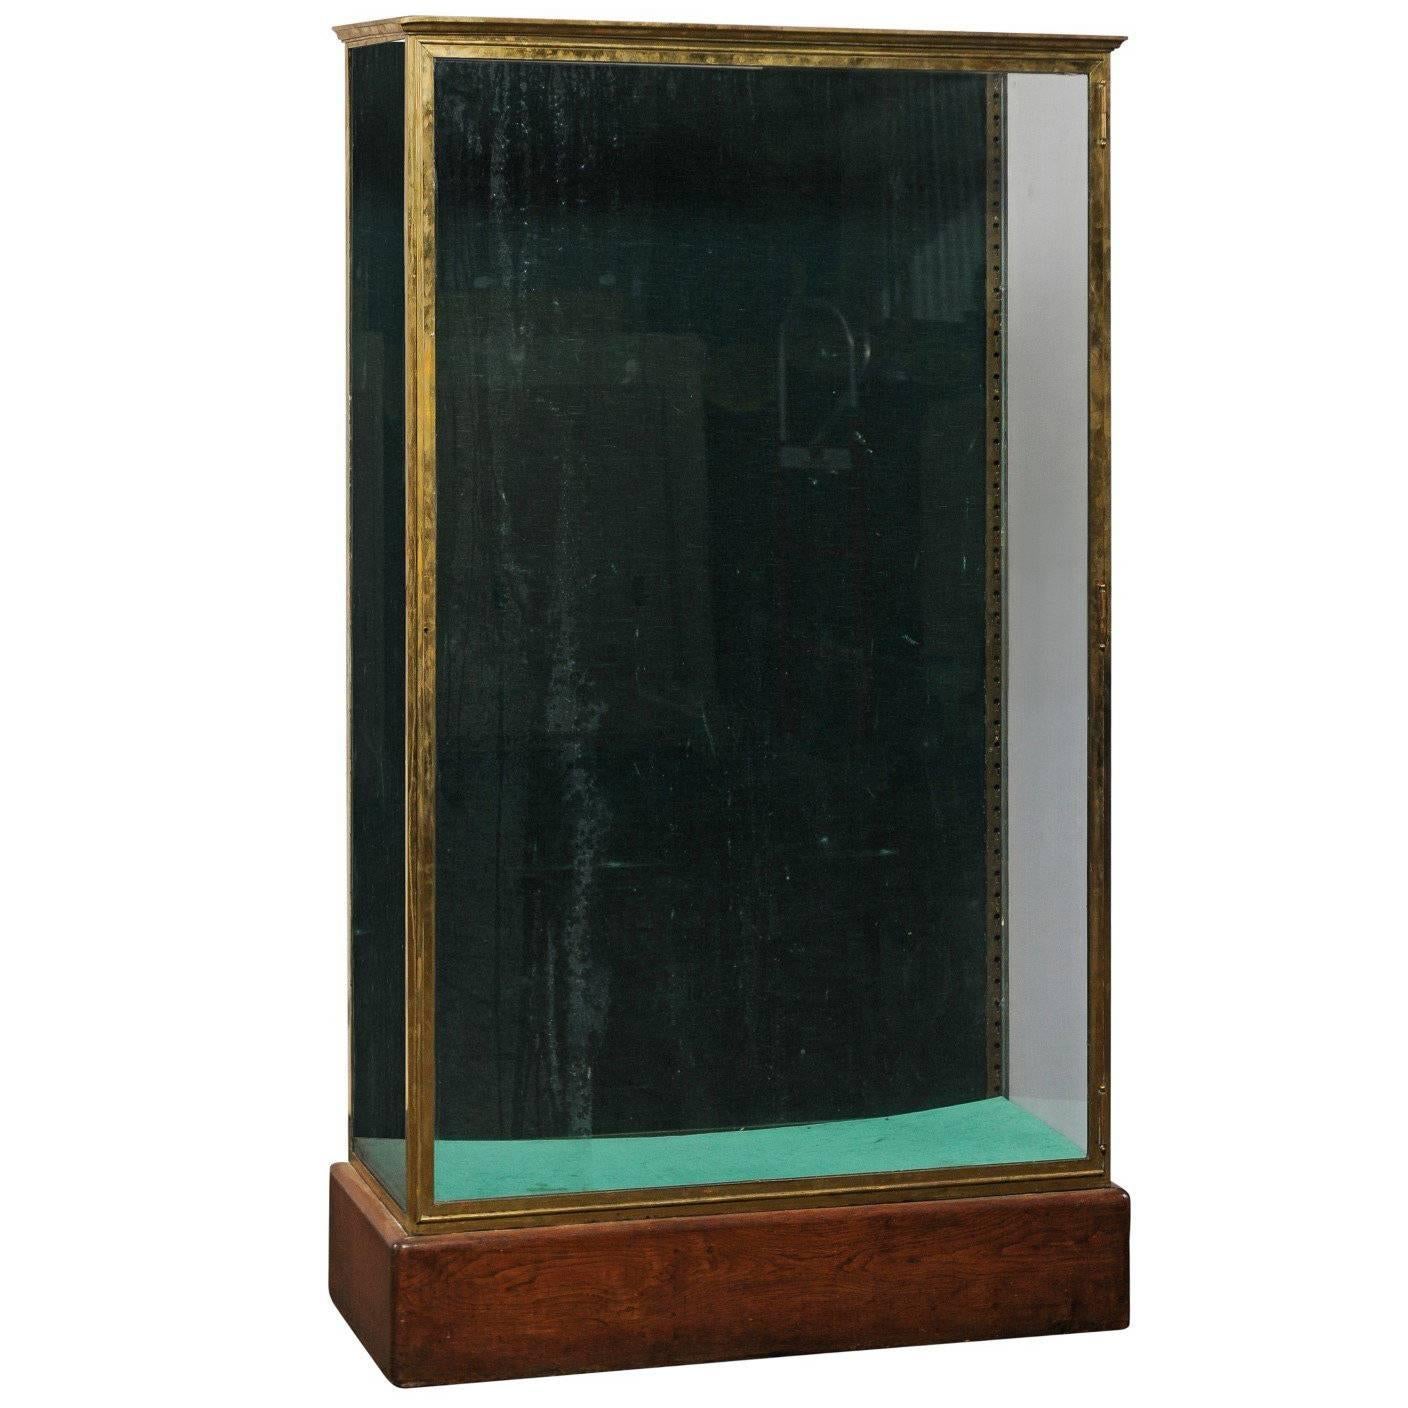 Early 20th Century Large Bronze and Glass Vitrine Cabinet